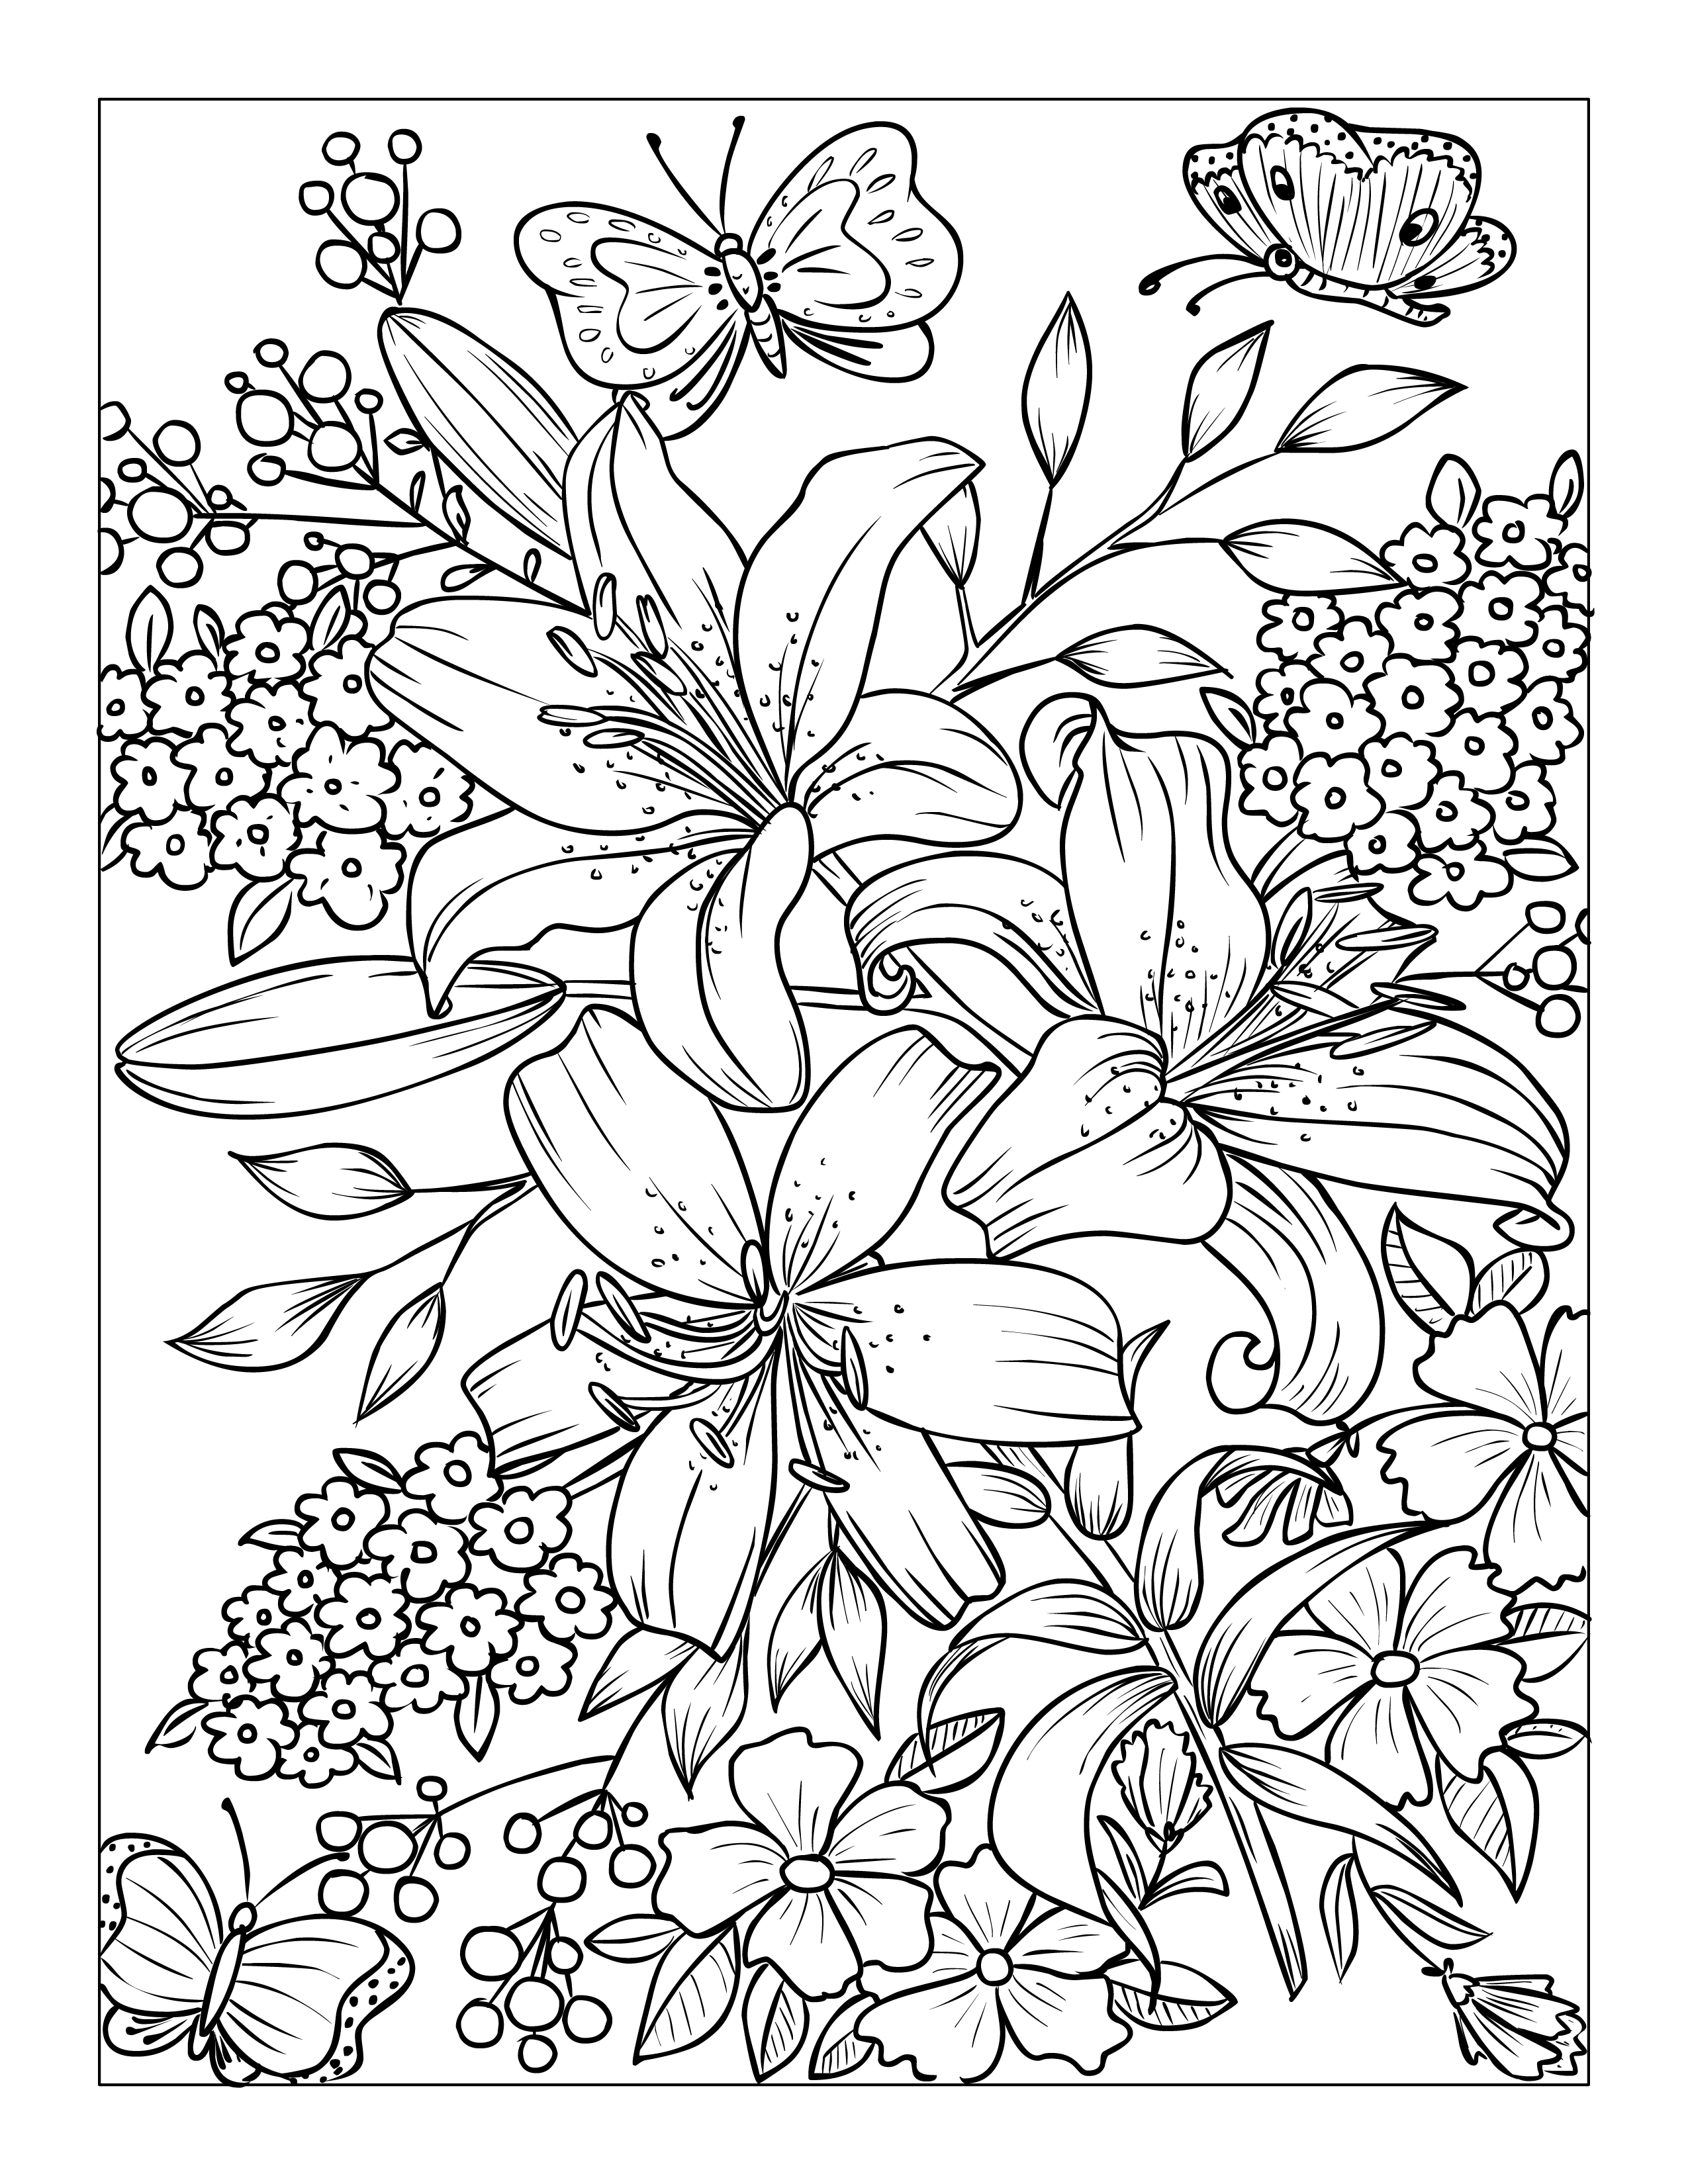 Ava Browne Coloring Books Chibi Animals Coloring Book, Adult Coloring Book  Gift for Women, Teens, Girls. Owls, Cats, Hippos PDF DOWNLOAD 